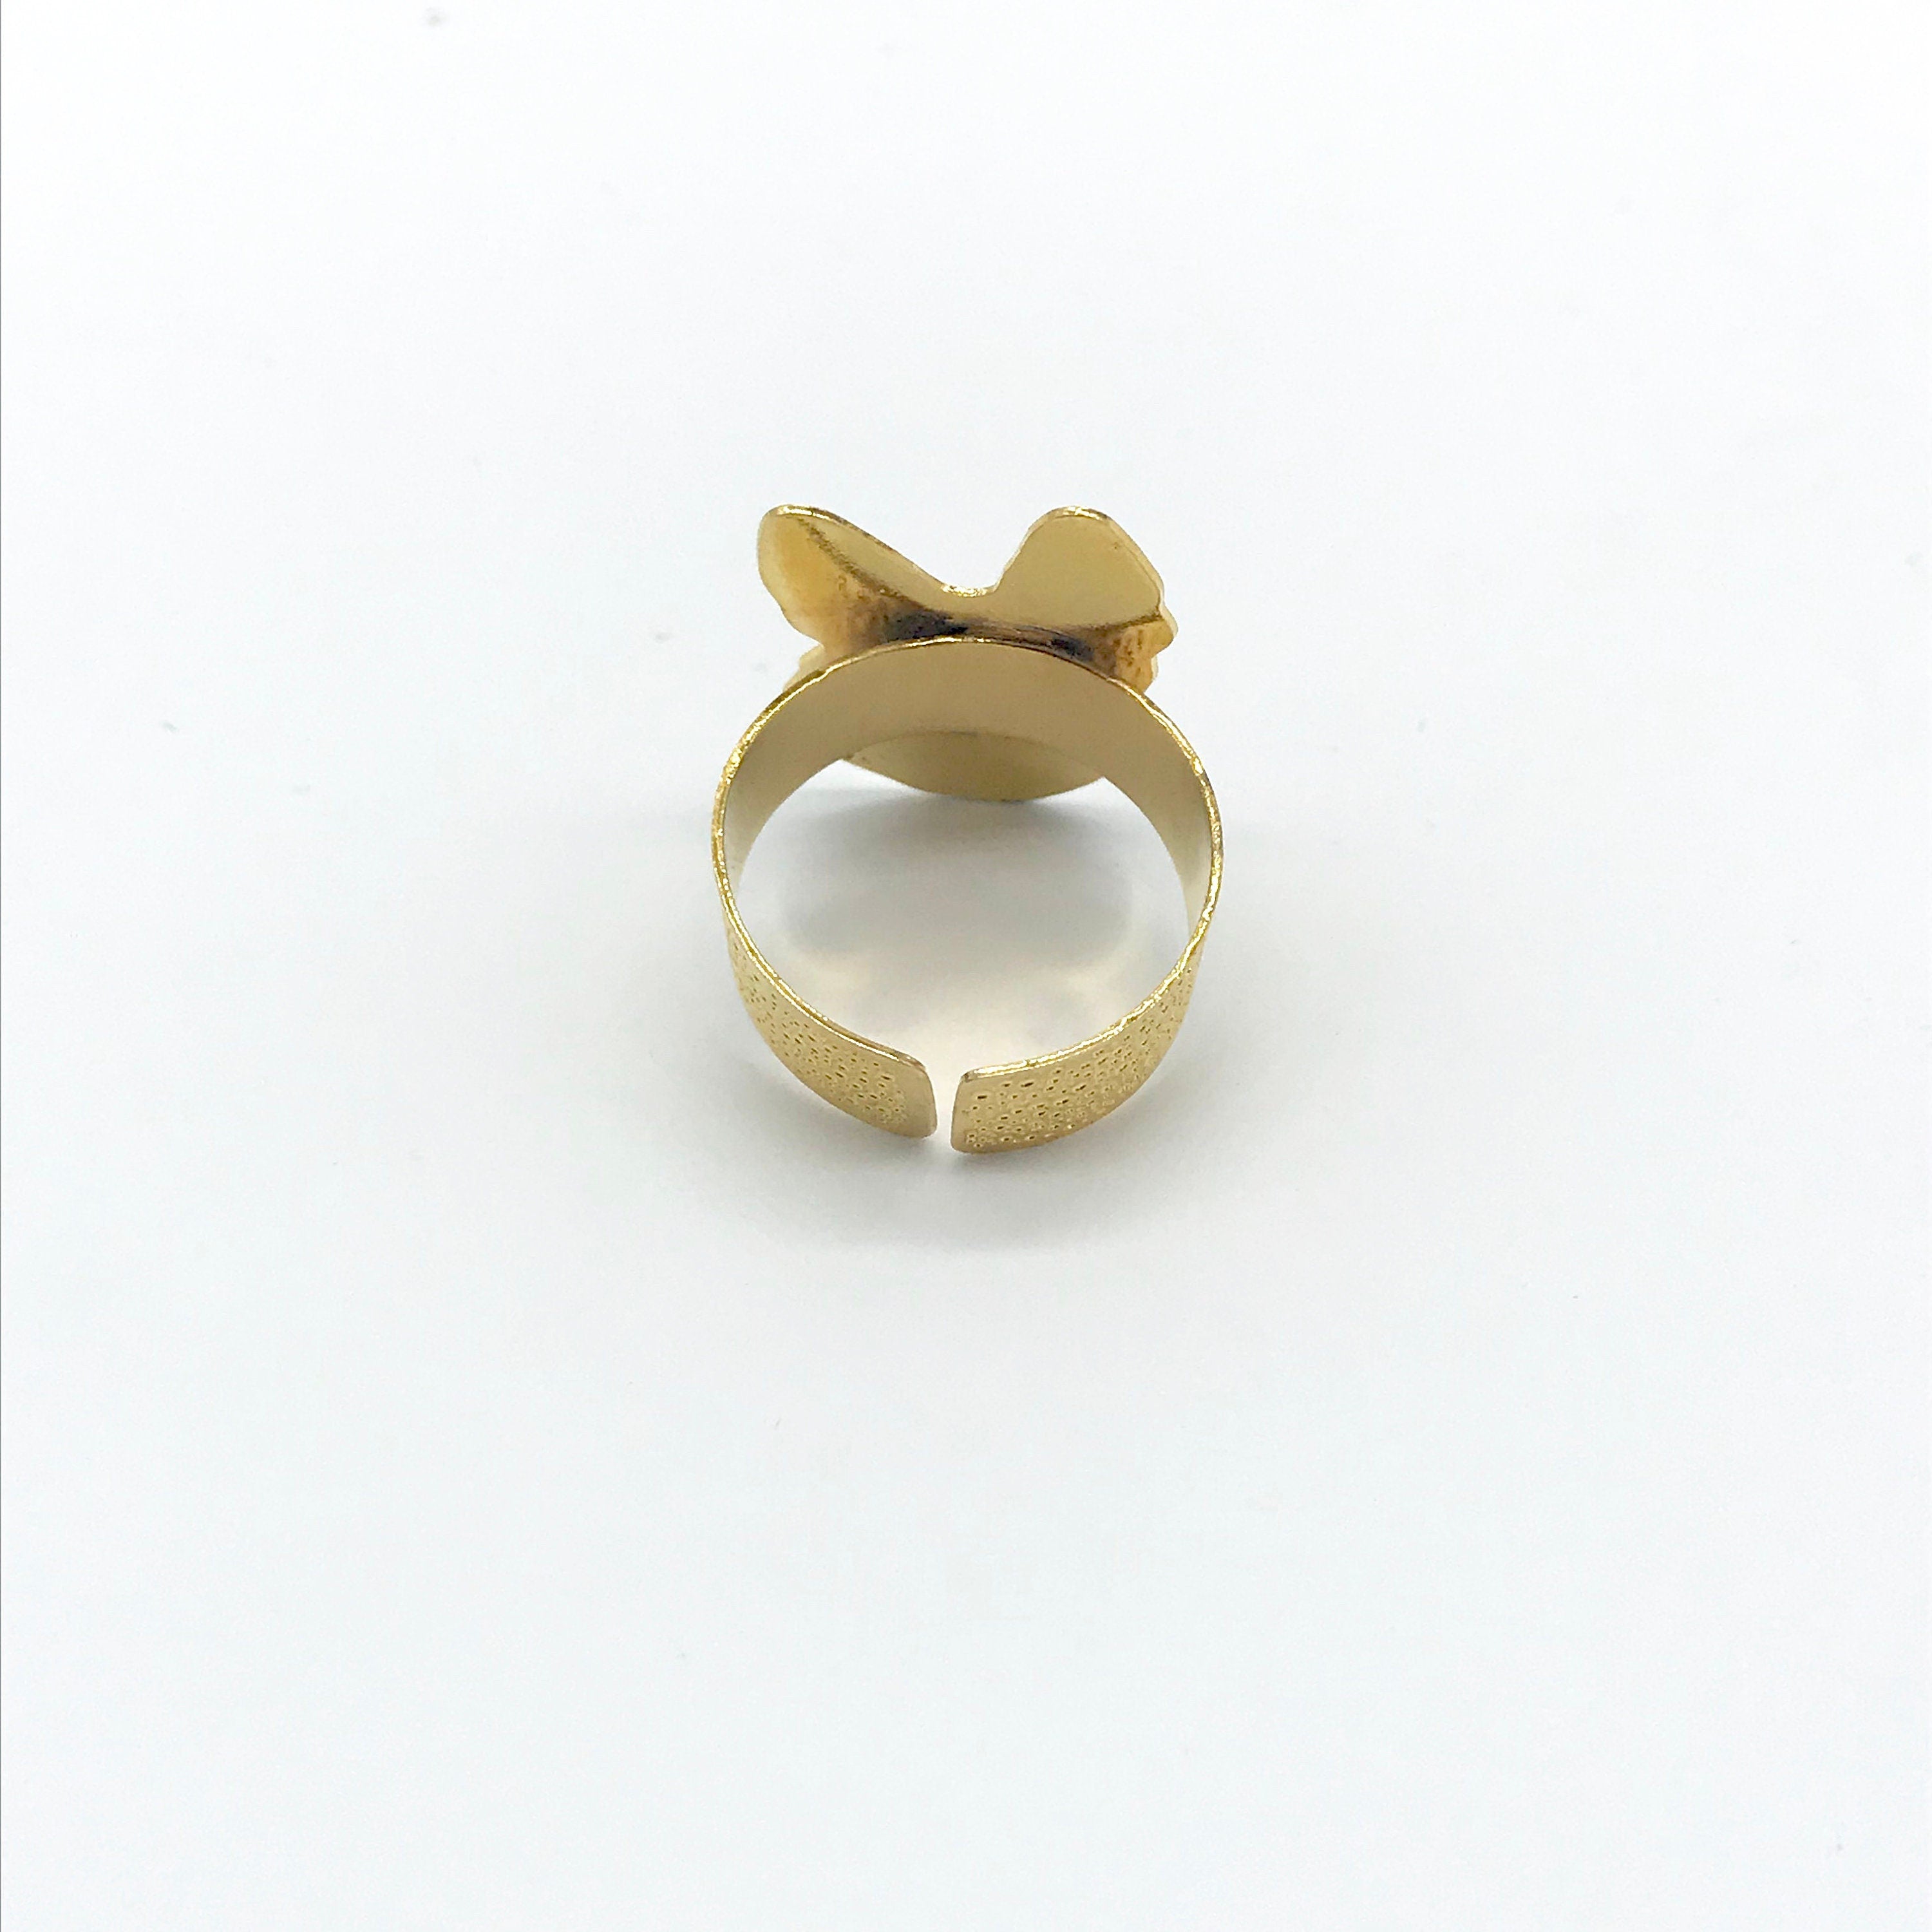 GERMAN SHEPHERD RING, dog breeds, pet lovers, ring  women, unique jewelry, ring, dog lovers, dog rescue, fashion jewelry